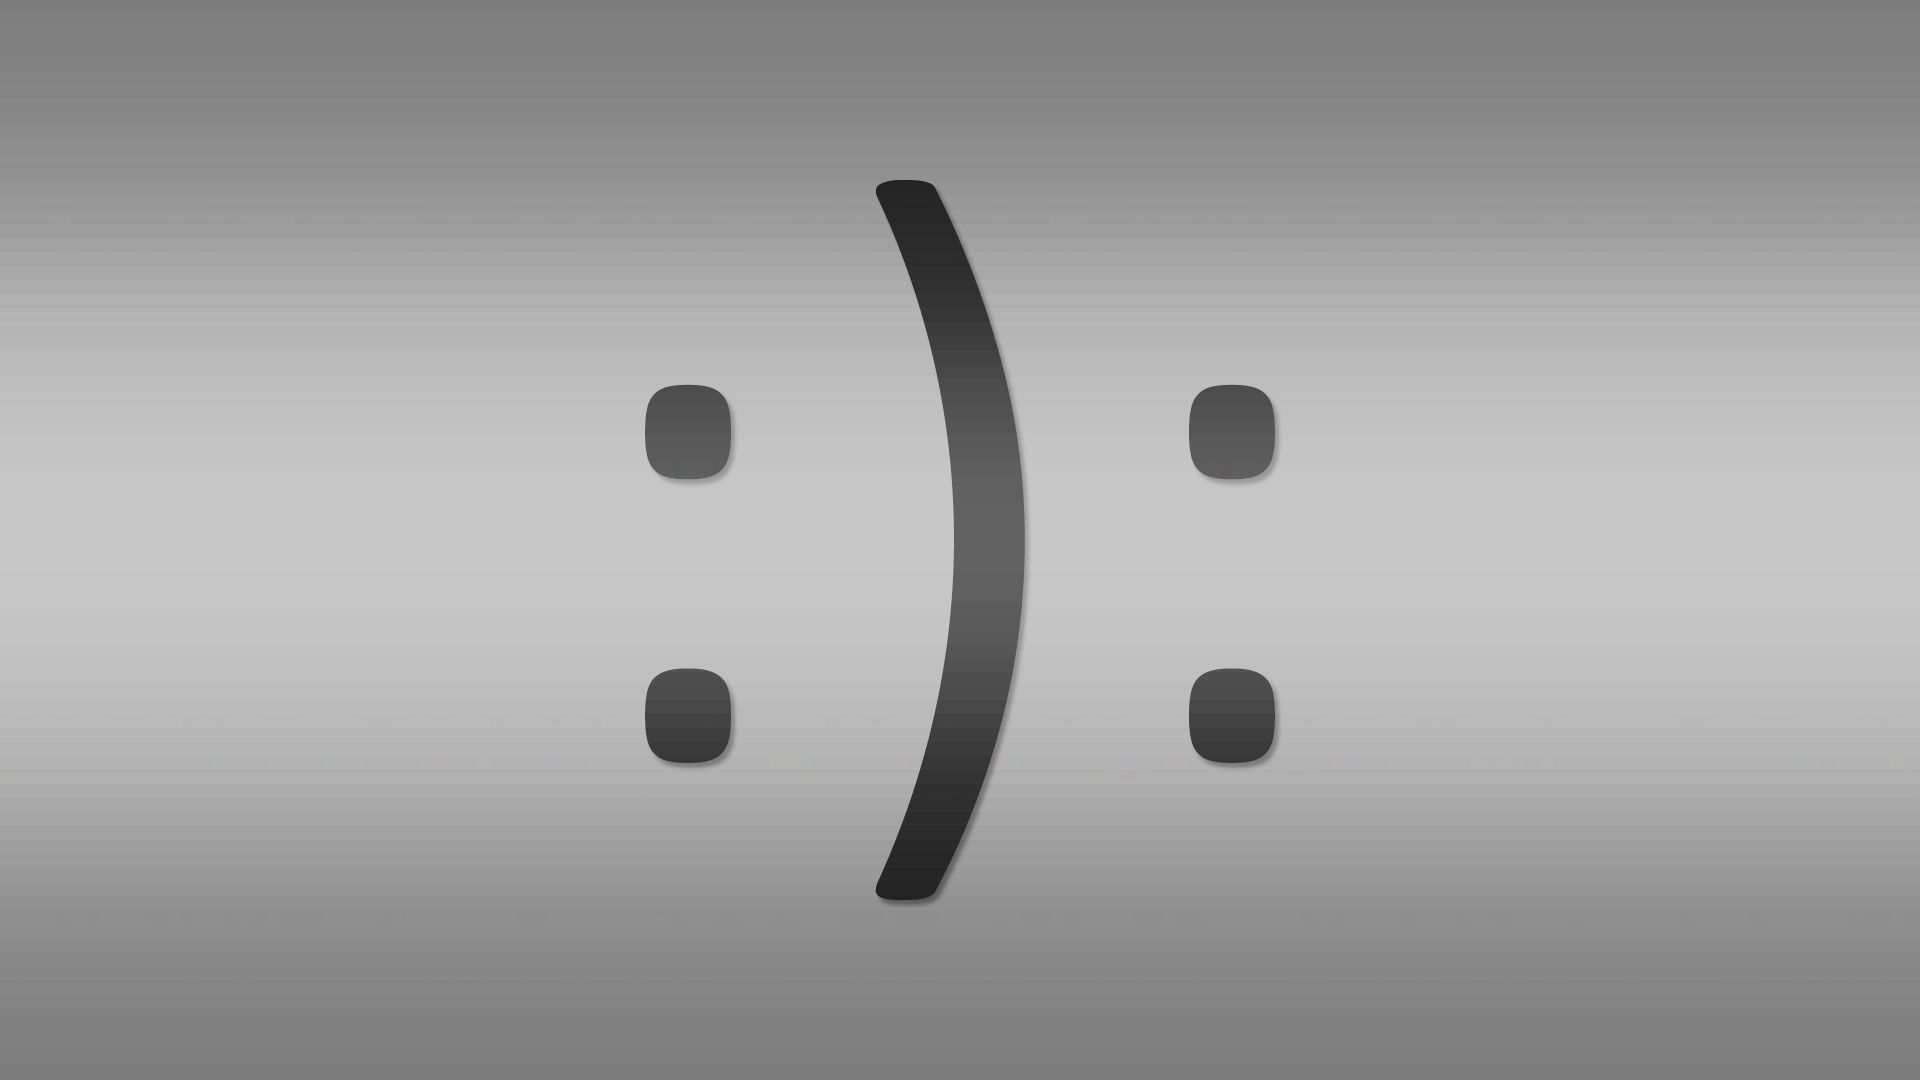 Illustration of  a typed colon, end parenthesis and colon, resembling a smiling and frowning face.